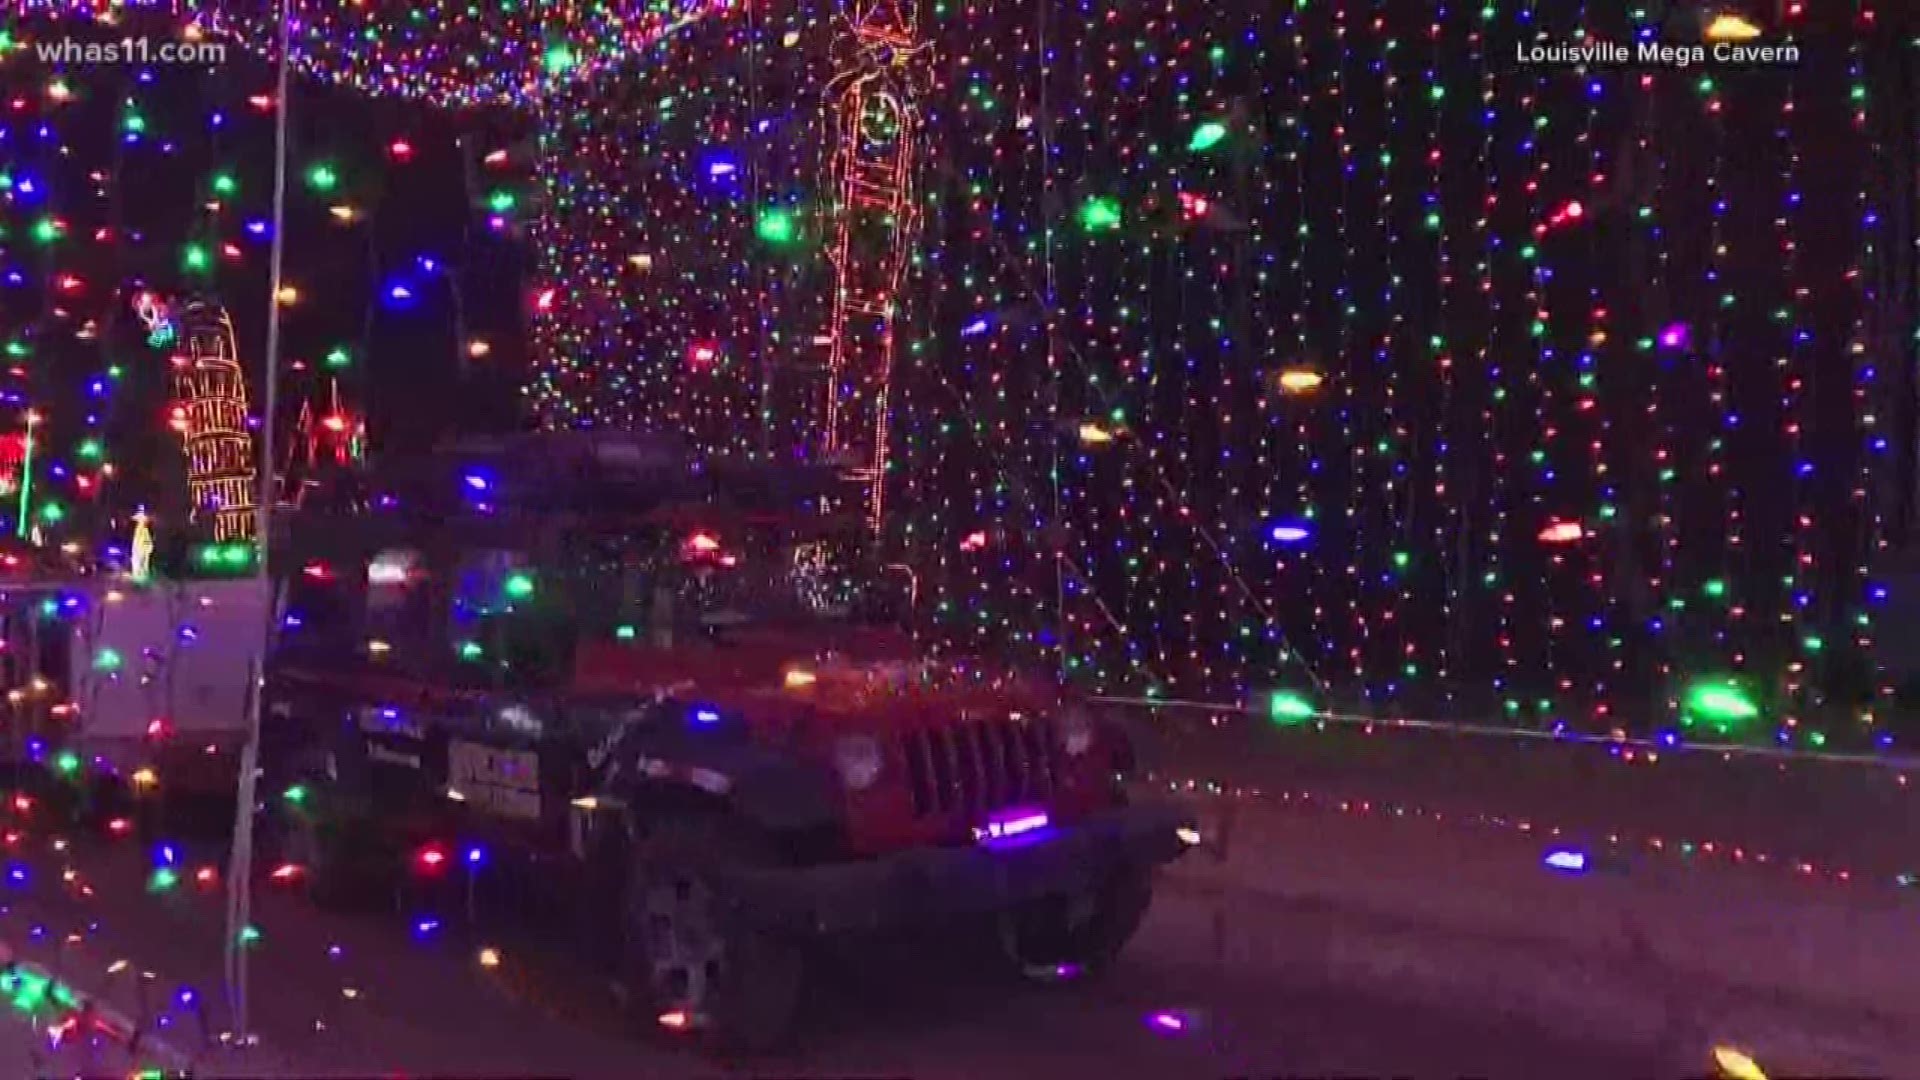 Lights under Louisville is worth the drive to the Louisville Mega Cavern off Taylor Avenue.
The mile-long route takes about 30 minutes to complete.